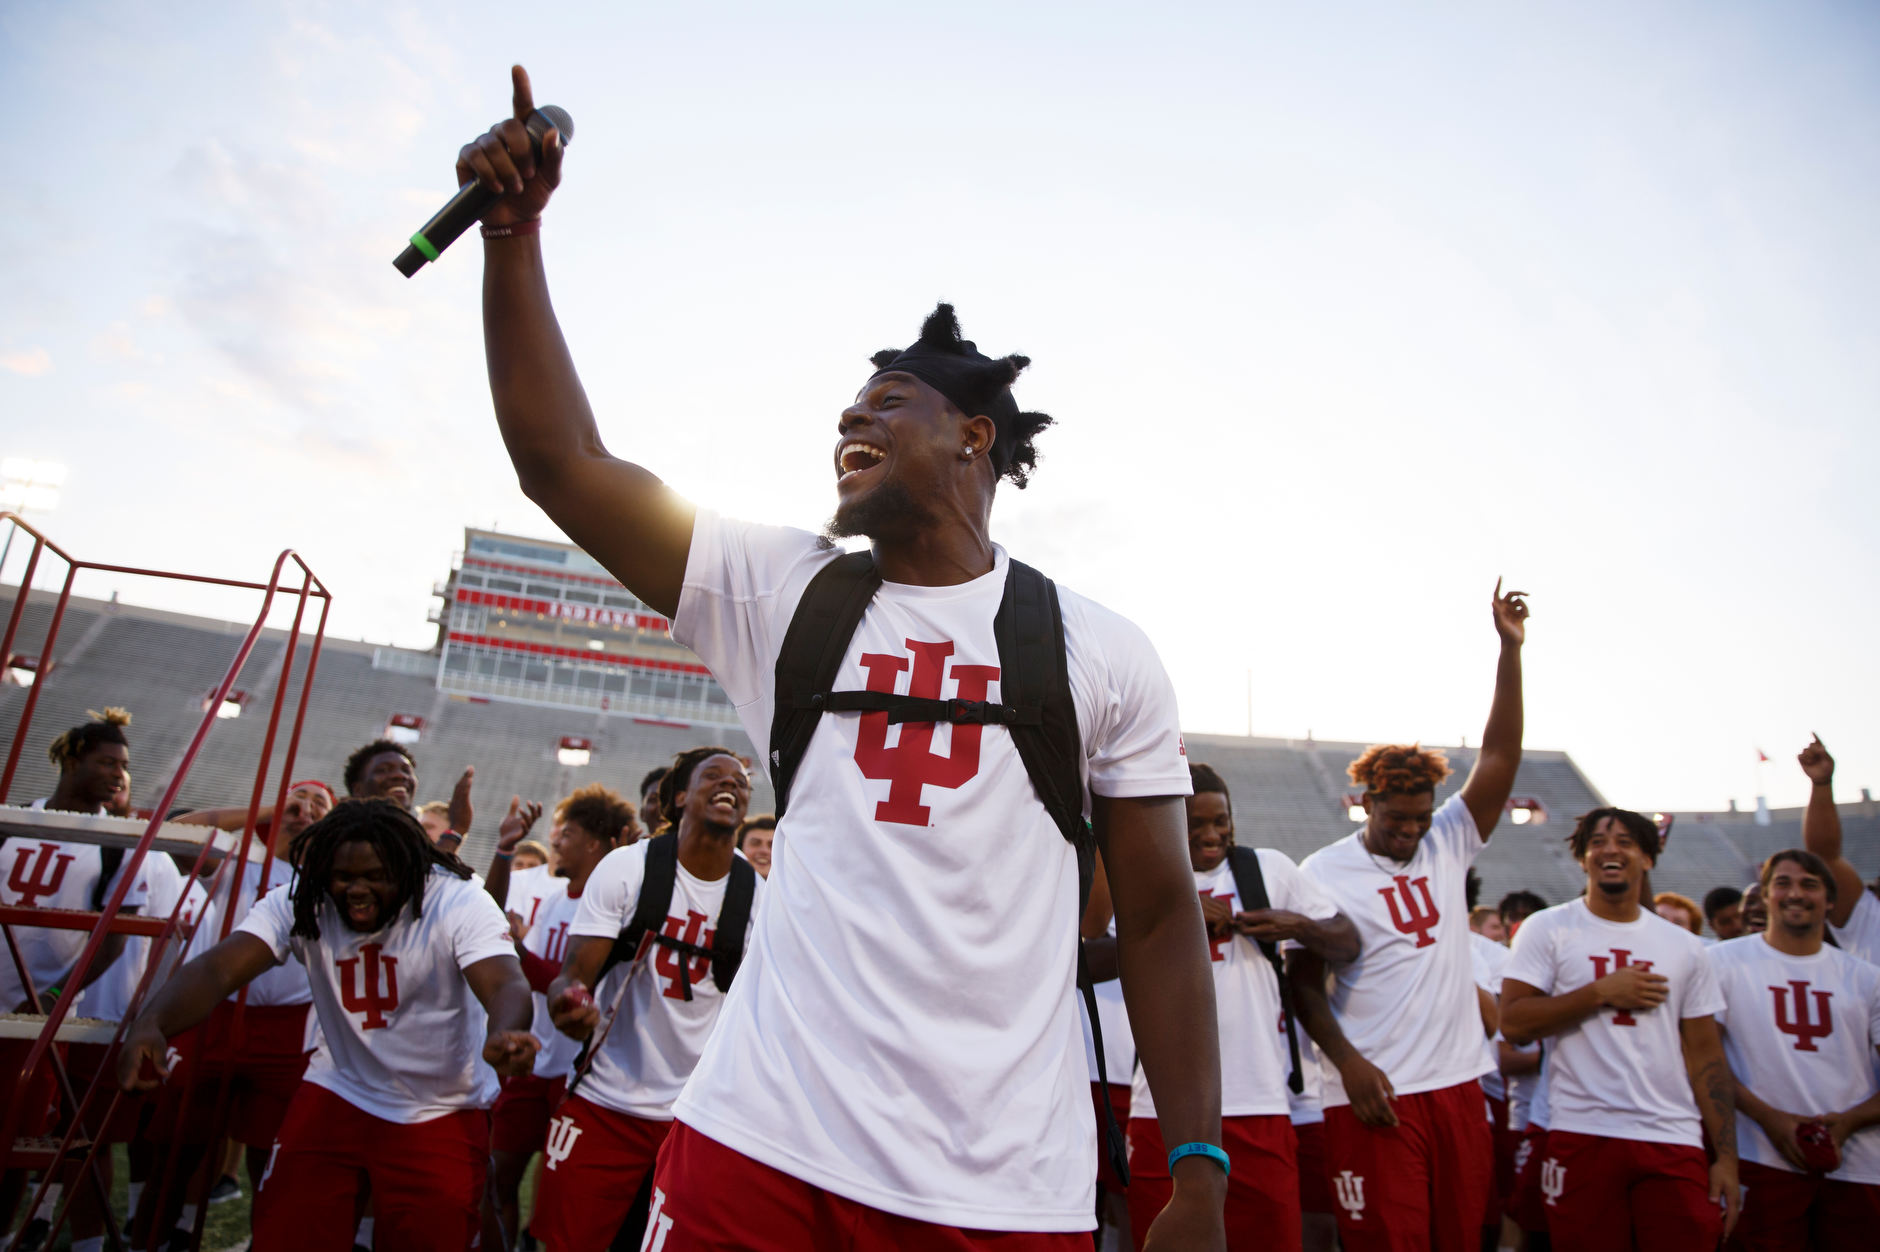 IU wide receiver Donavan Hale pumps up the crowd during the Traditions and Spirit of IU at Memorial Stadium on Friday, Aug. 23, 2019. (James Brosher/Indiana University)